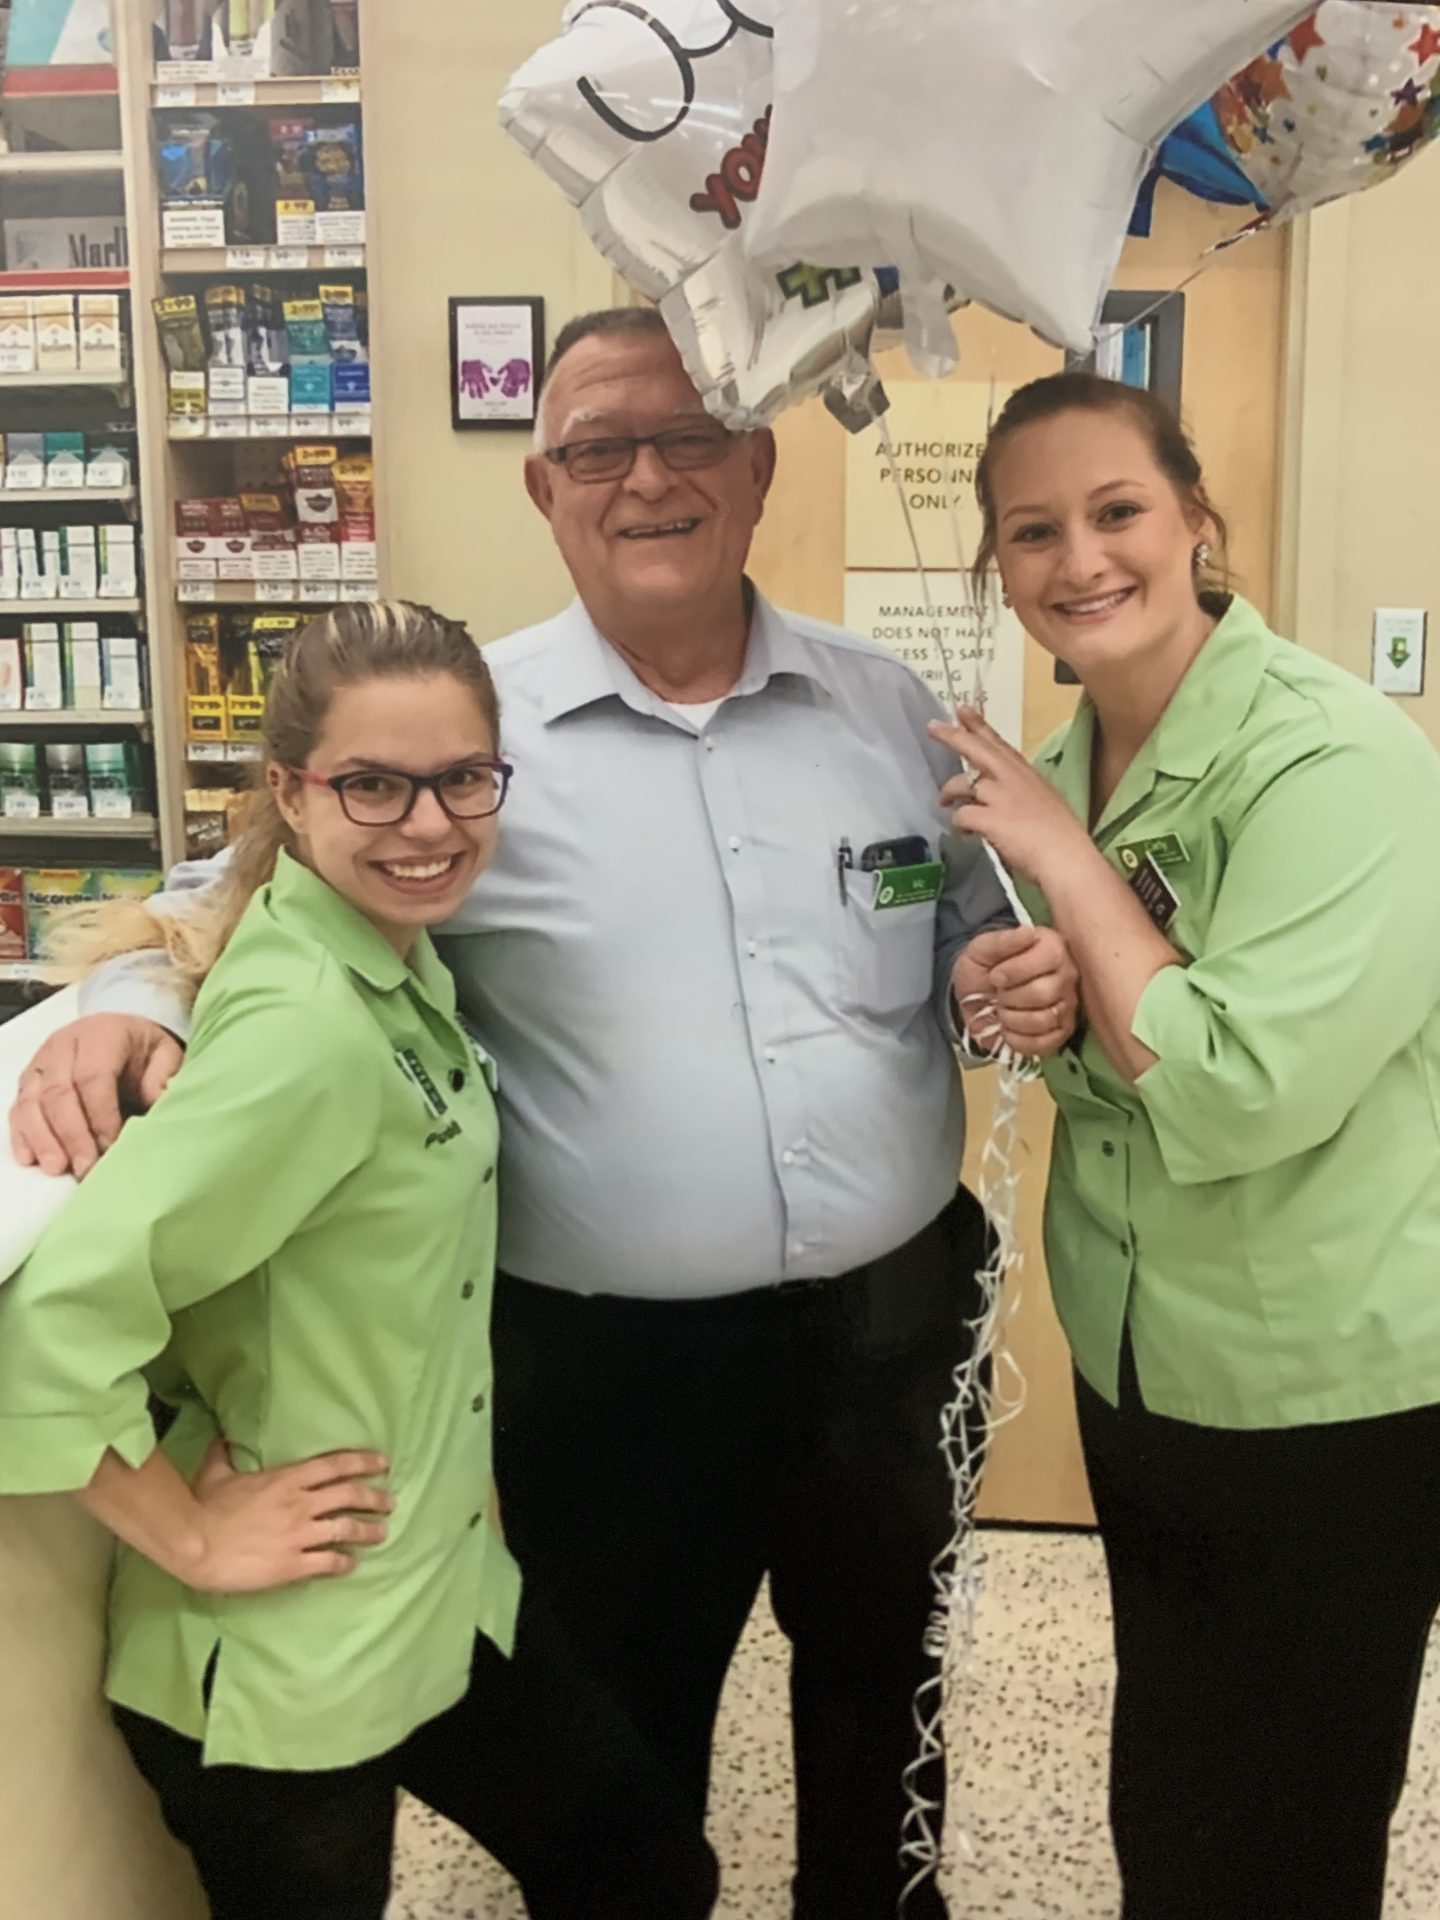 Vics last day with Publix660. Farewell to my friend and co manager.